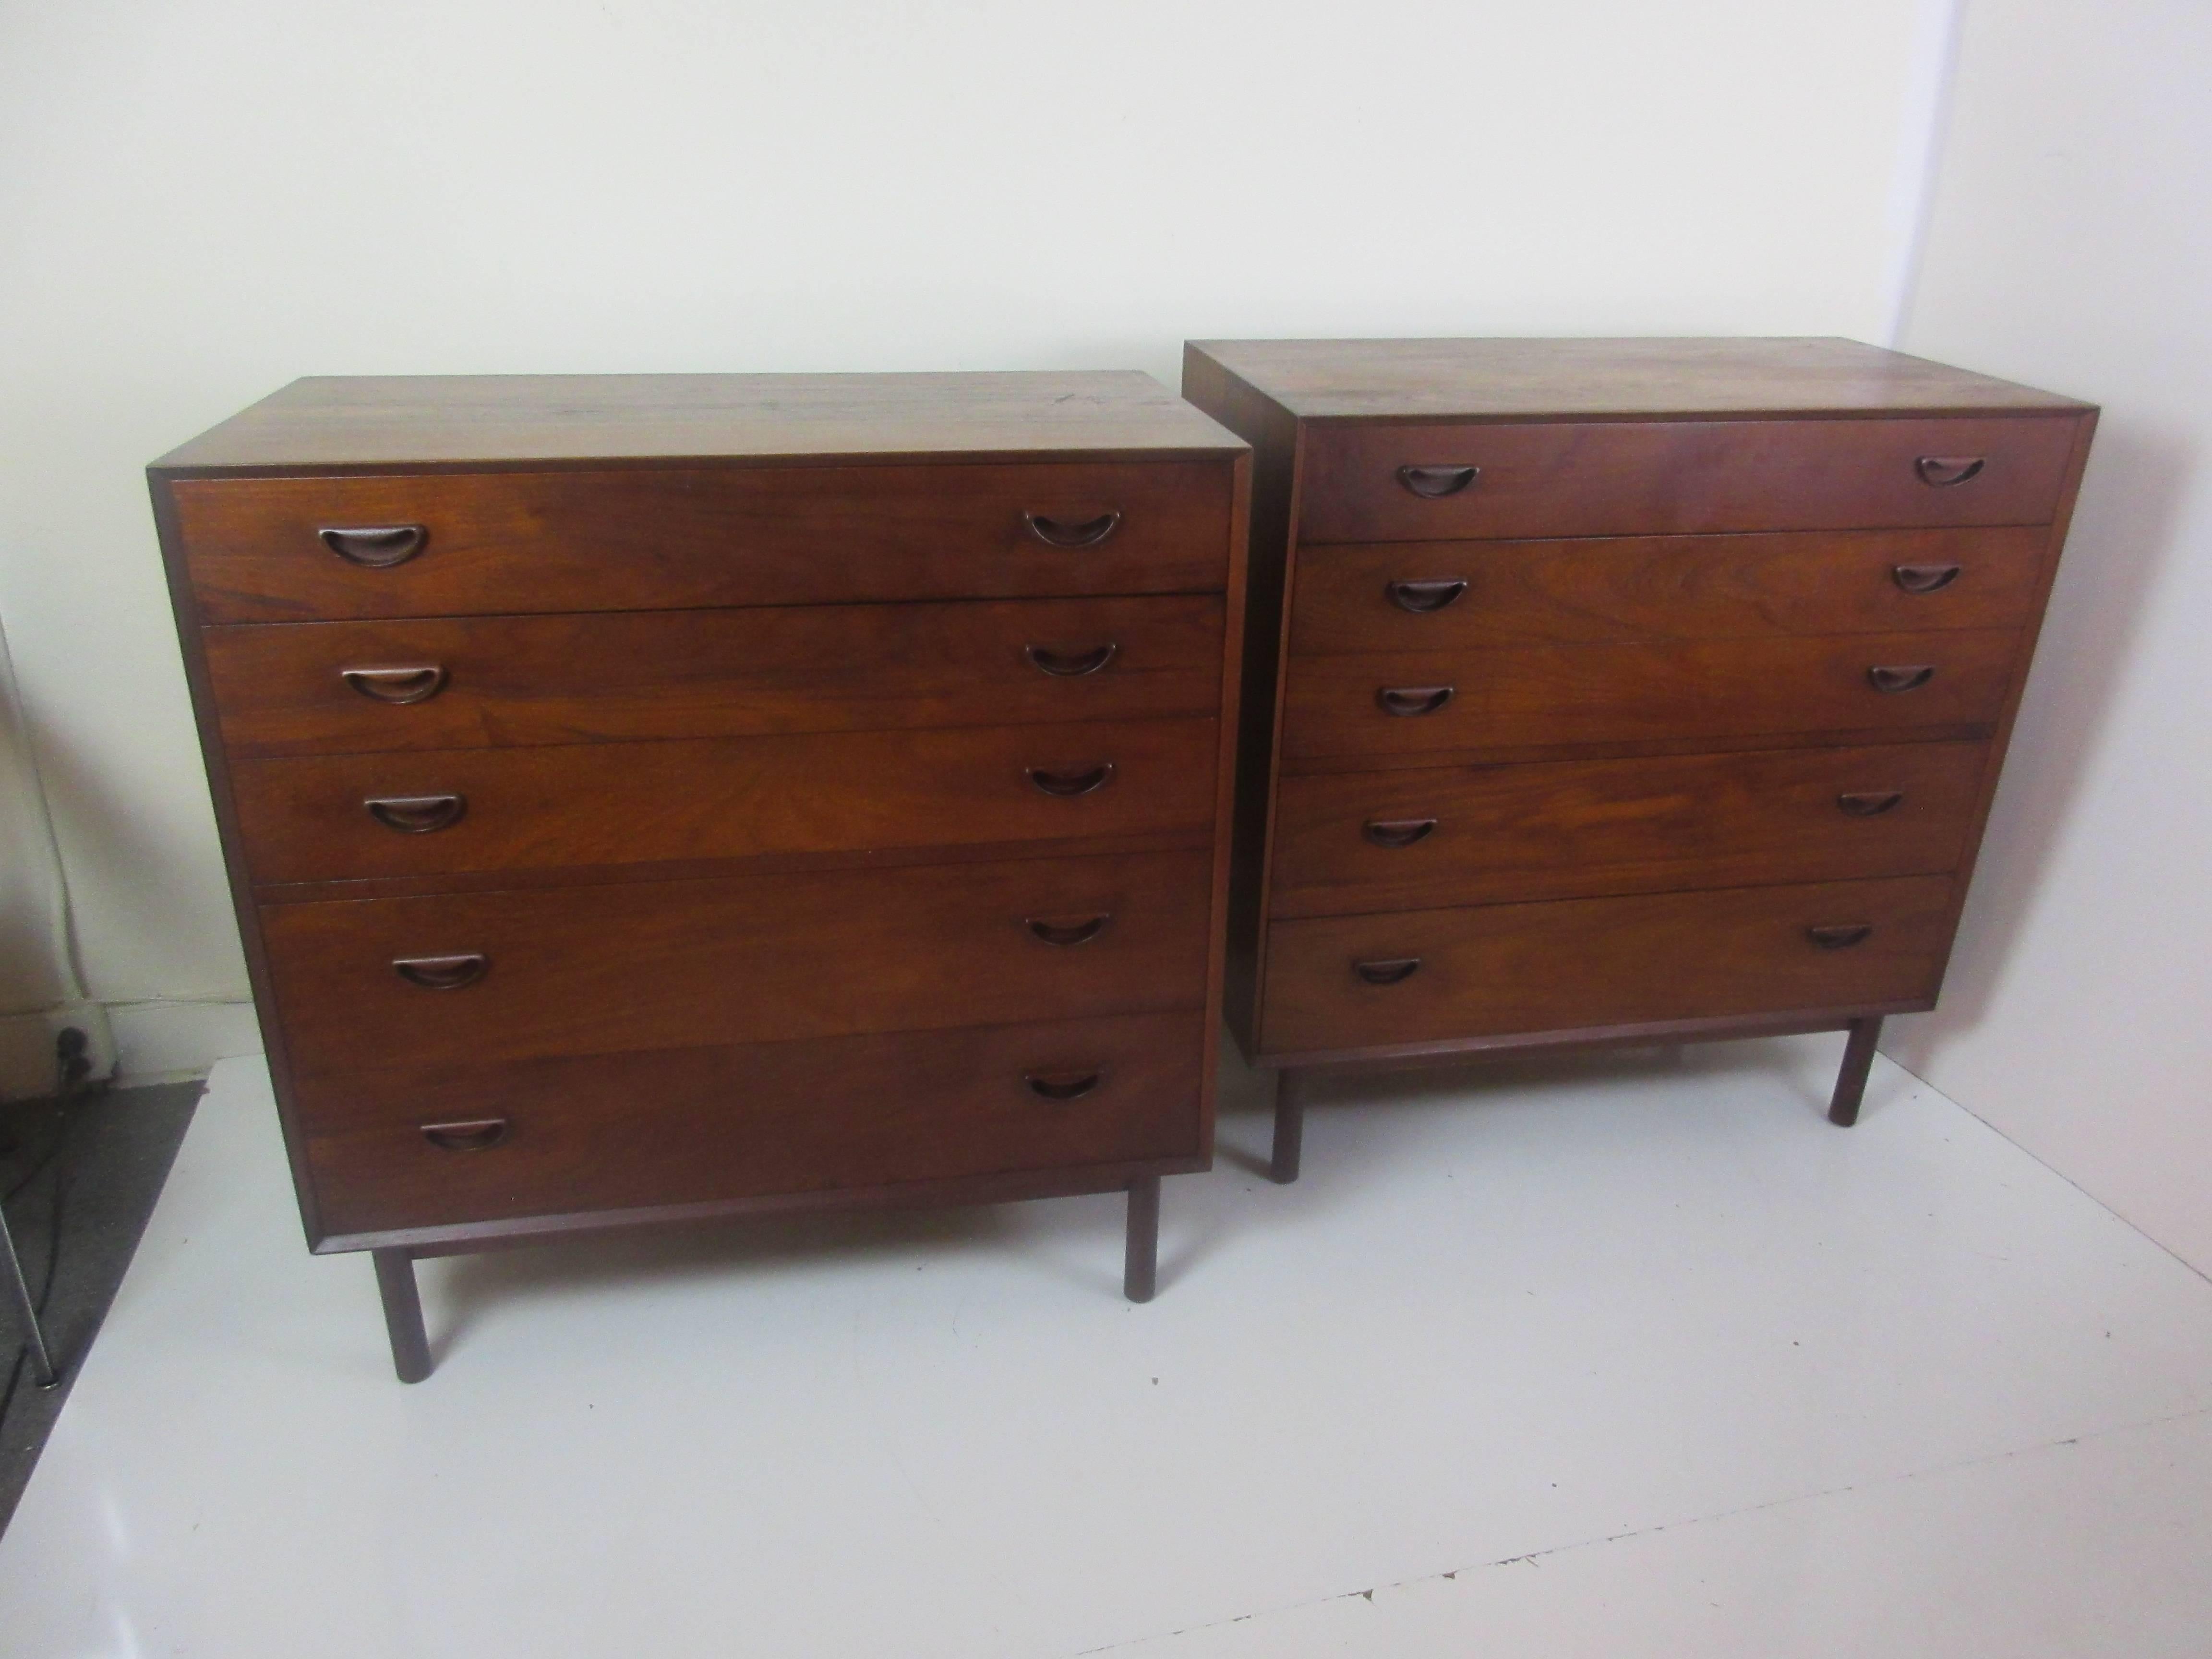 Peter Hvidt solid teak five-drawer chests (two available). Chest have Hvidt's signature tenon construction on all four corners of cabinet. Drawers have two and three separations. One chest has many dents on top.